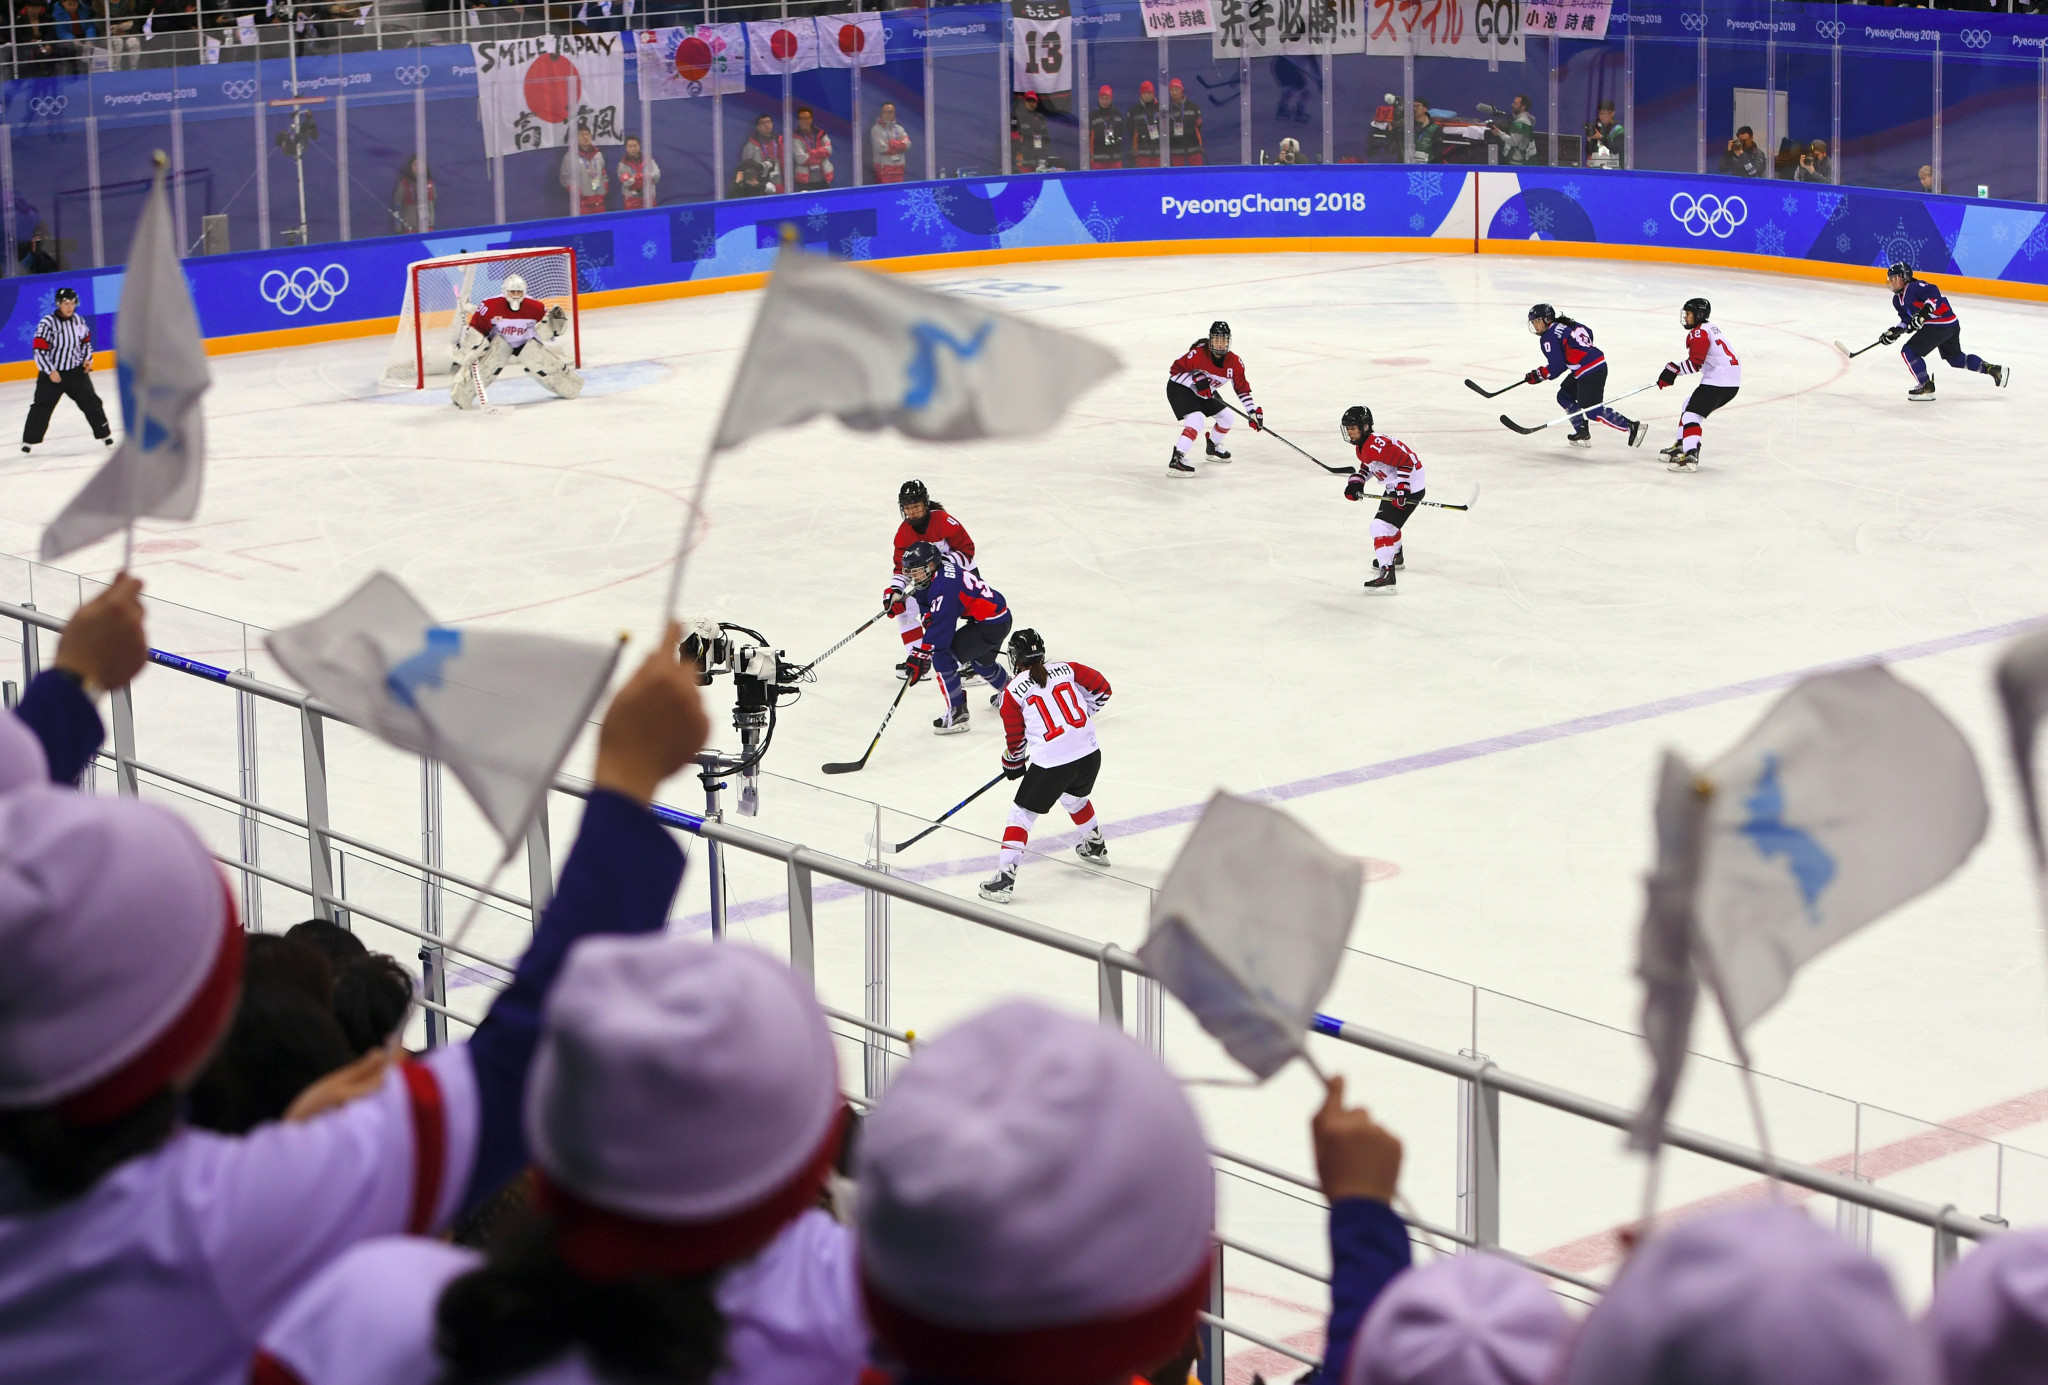 A unified Korean women's hockey team played at Pyeongchang 2018 ©Getty Images